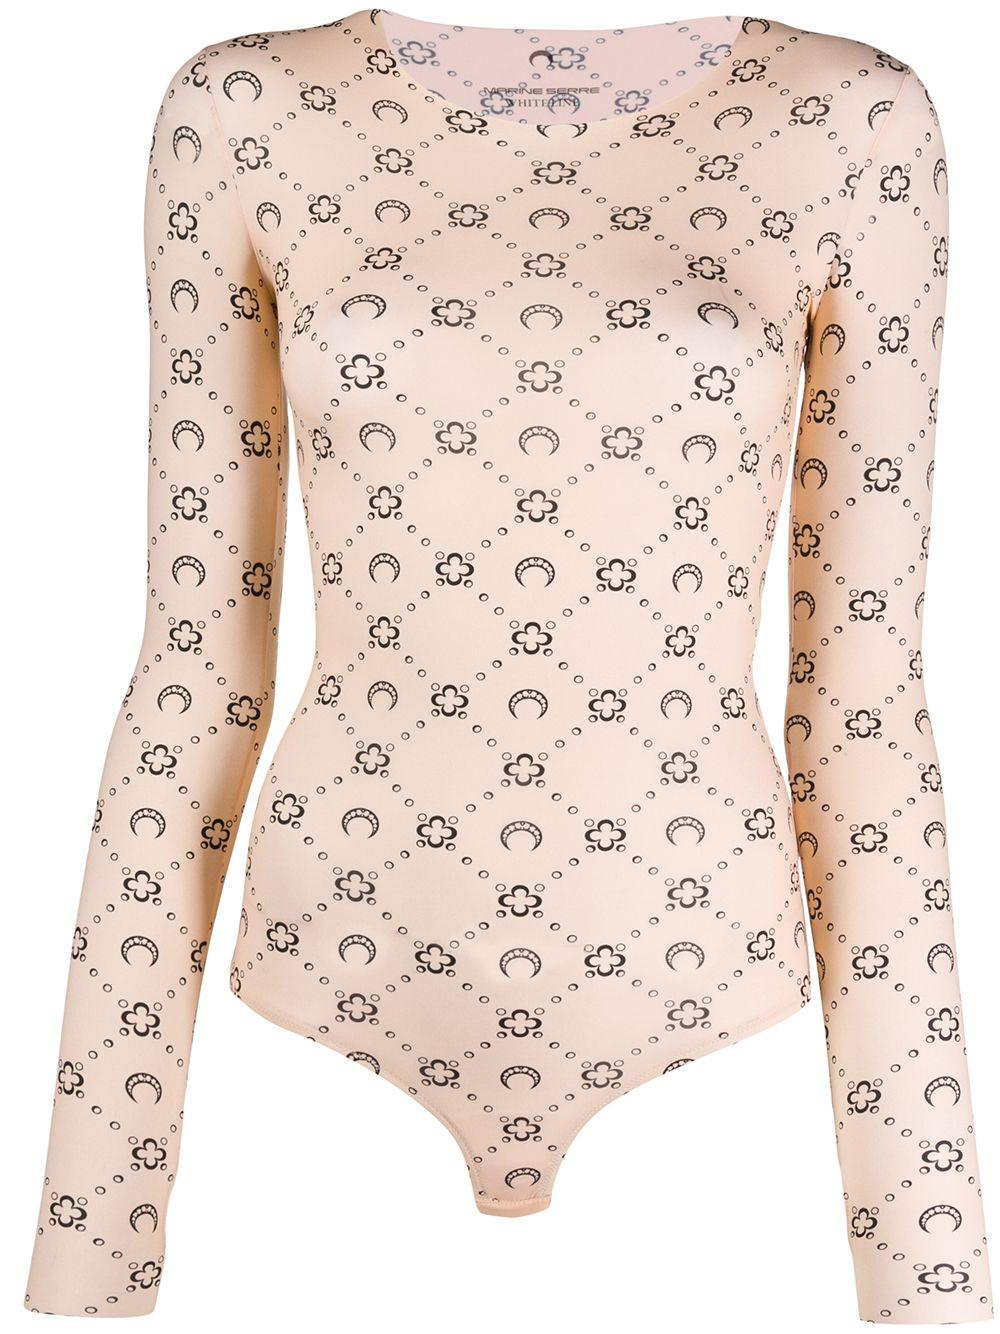 Marine Serre Synthetic Iconic Body Printed Bodysuit in Natural - Lyst